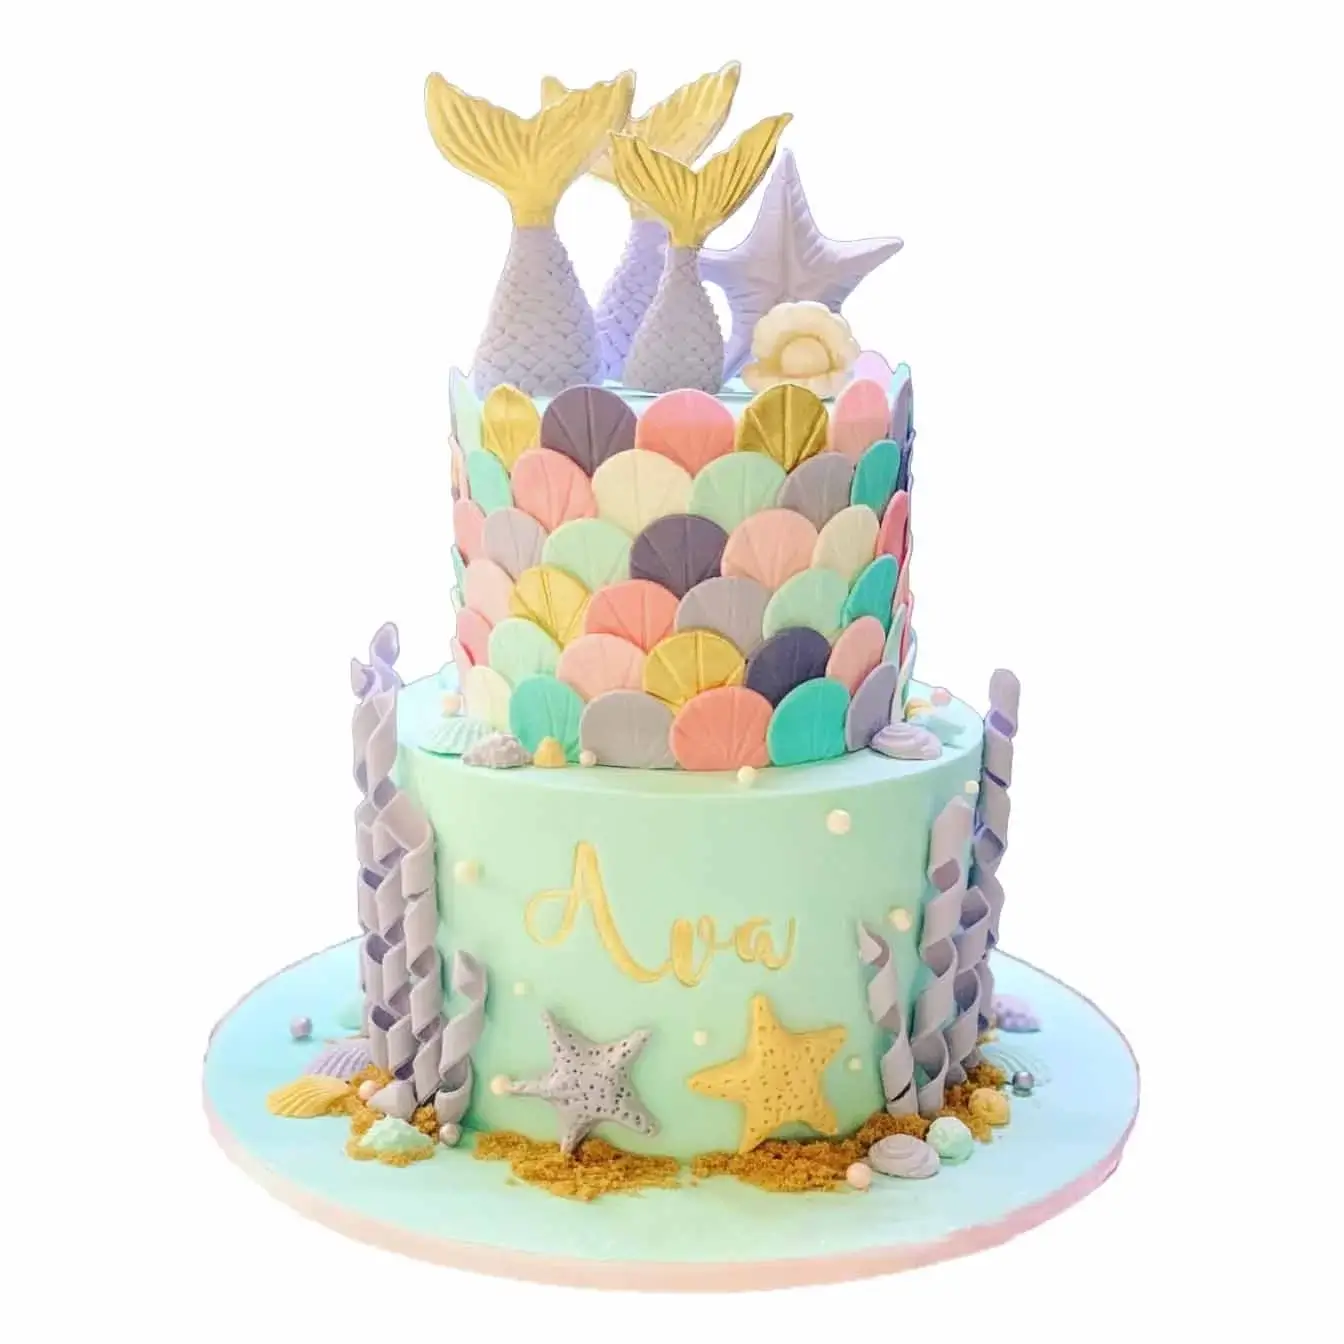 Mermaid cake with blue and purple ombre layers, topped with edible seashells and pearls